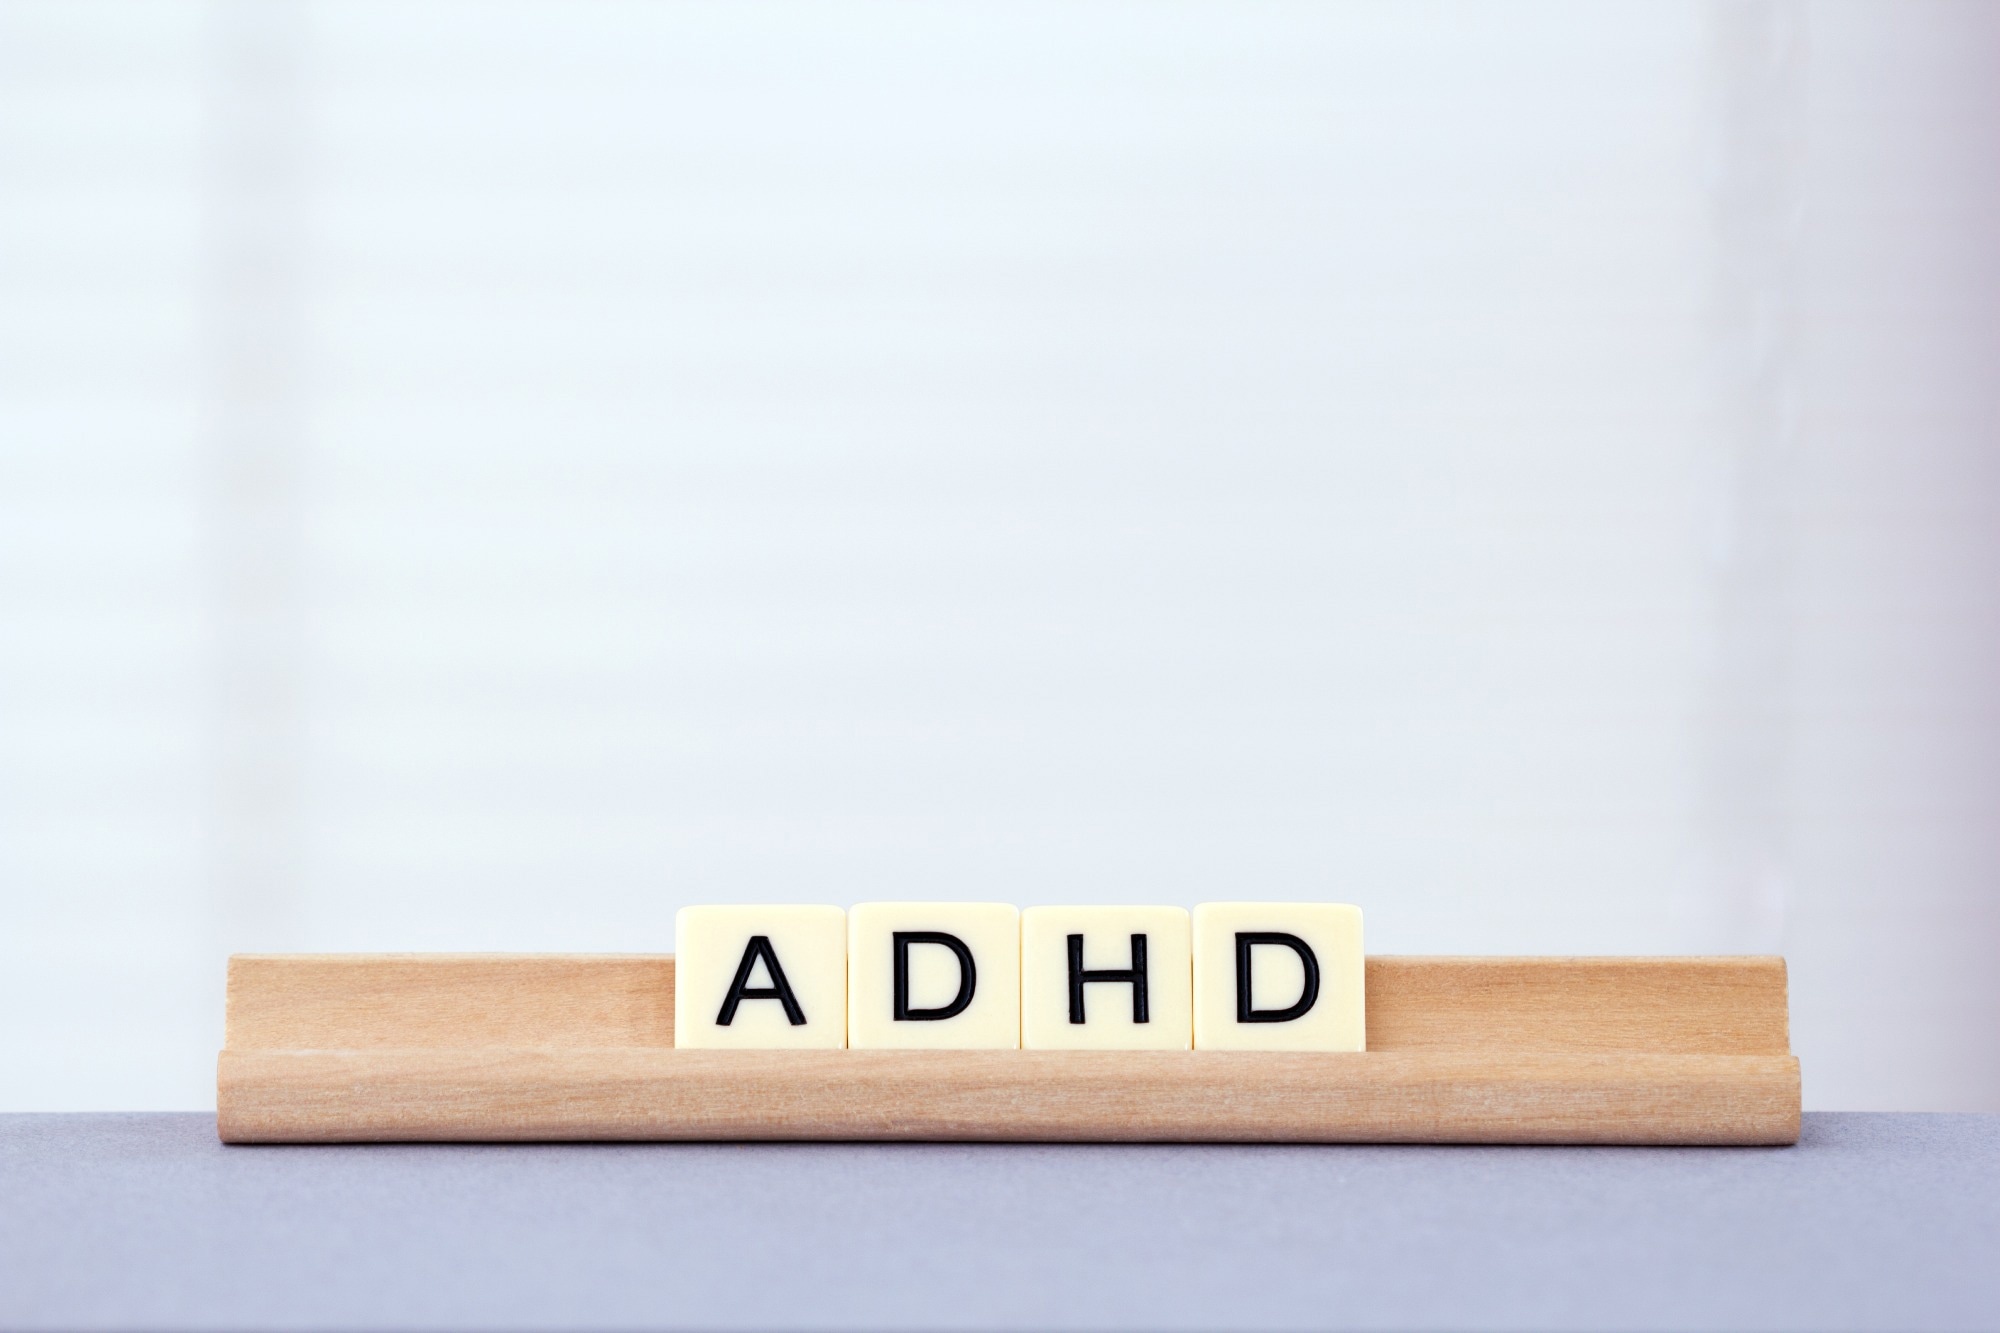 Cracking the code: machine learning models predict ADHD symptoms in youth